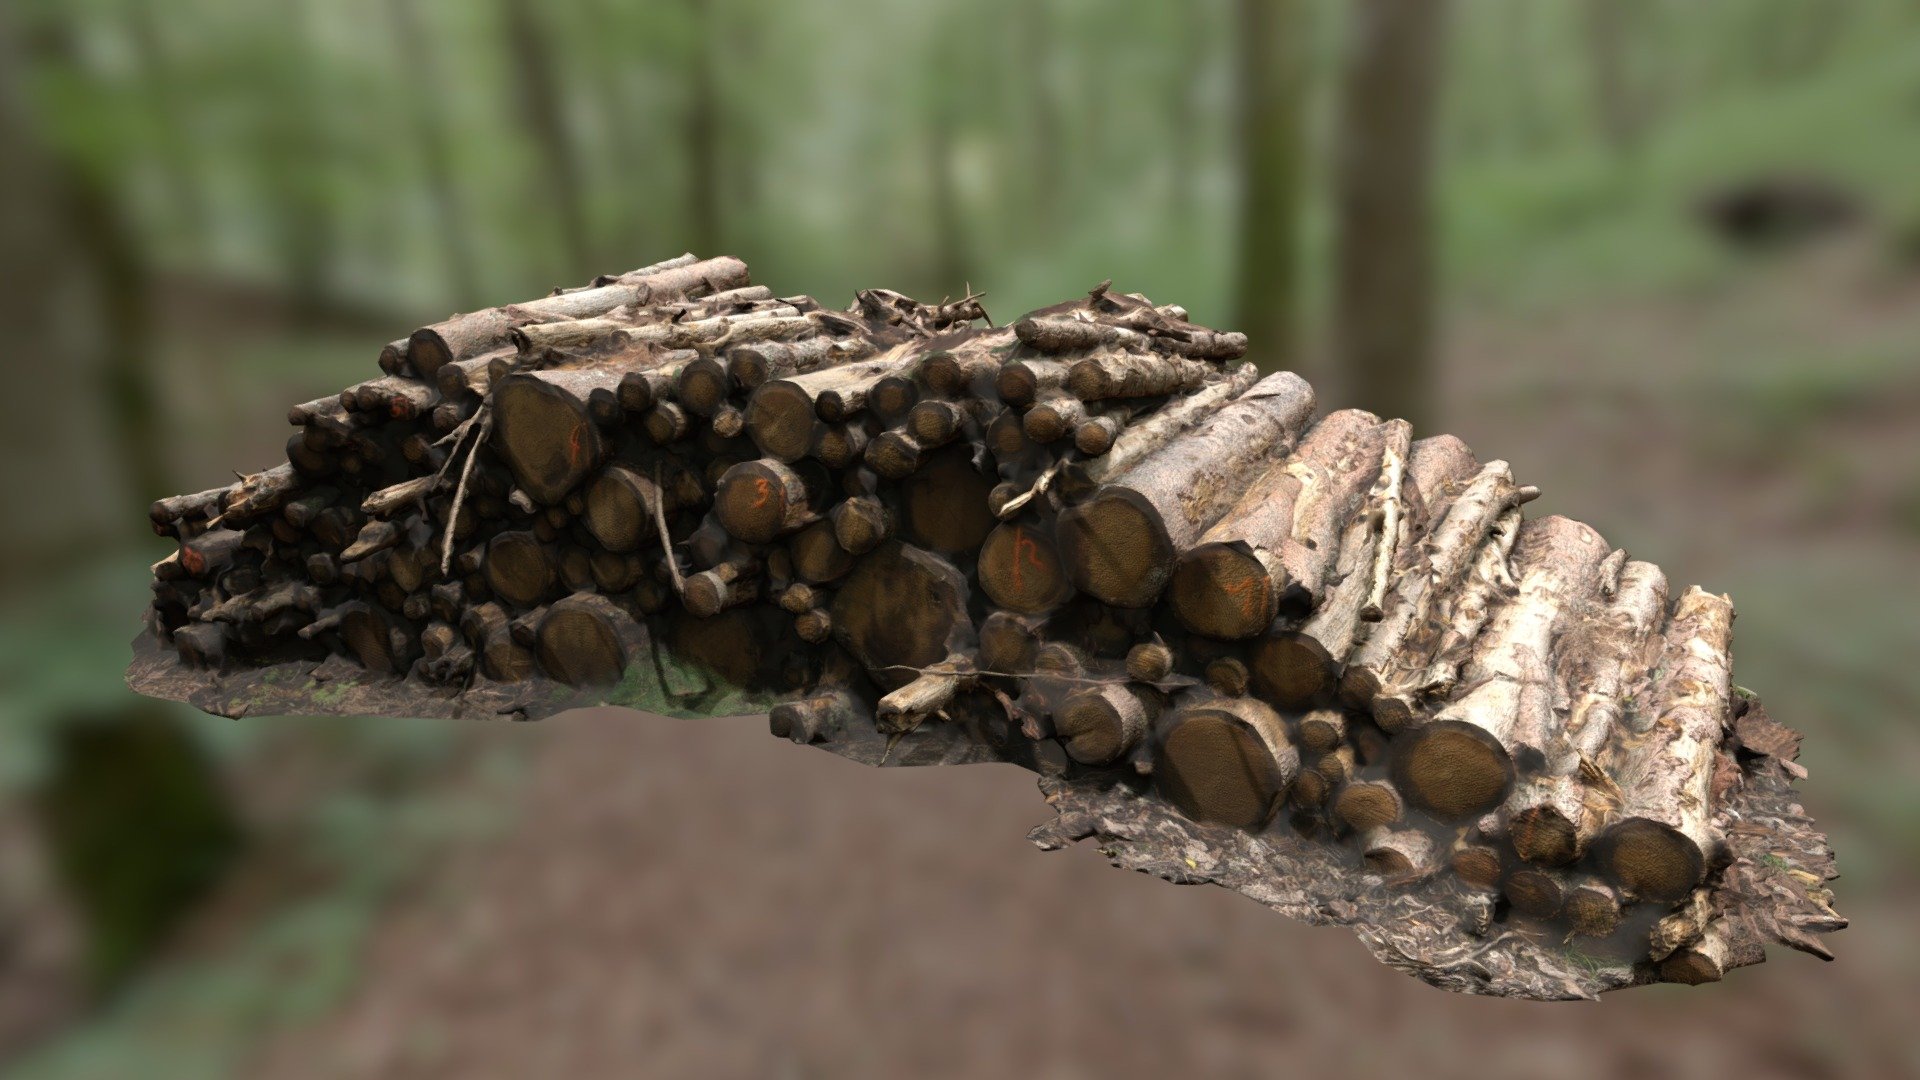 Stack of Wood / Holzpolter 4K Textures